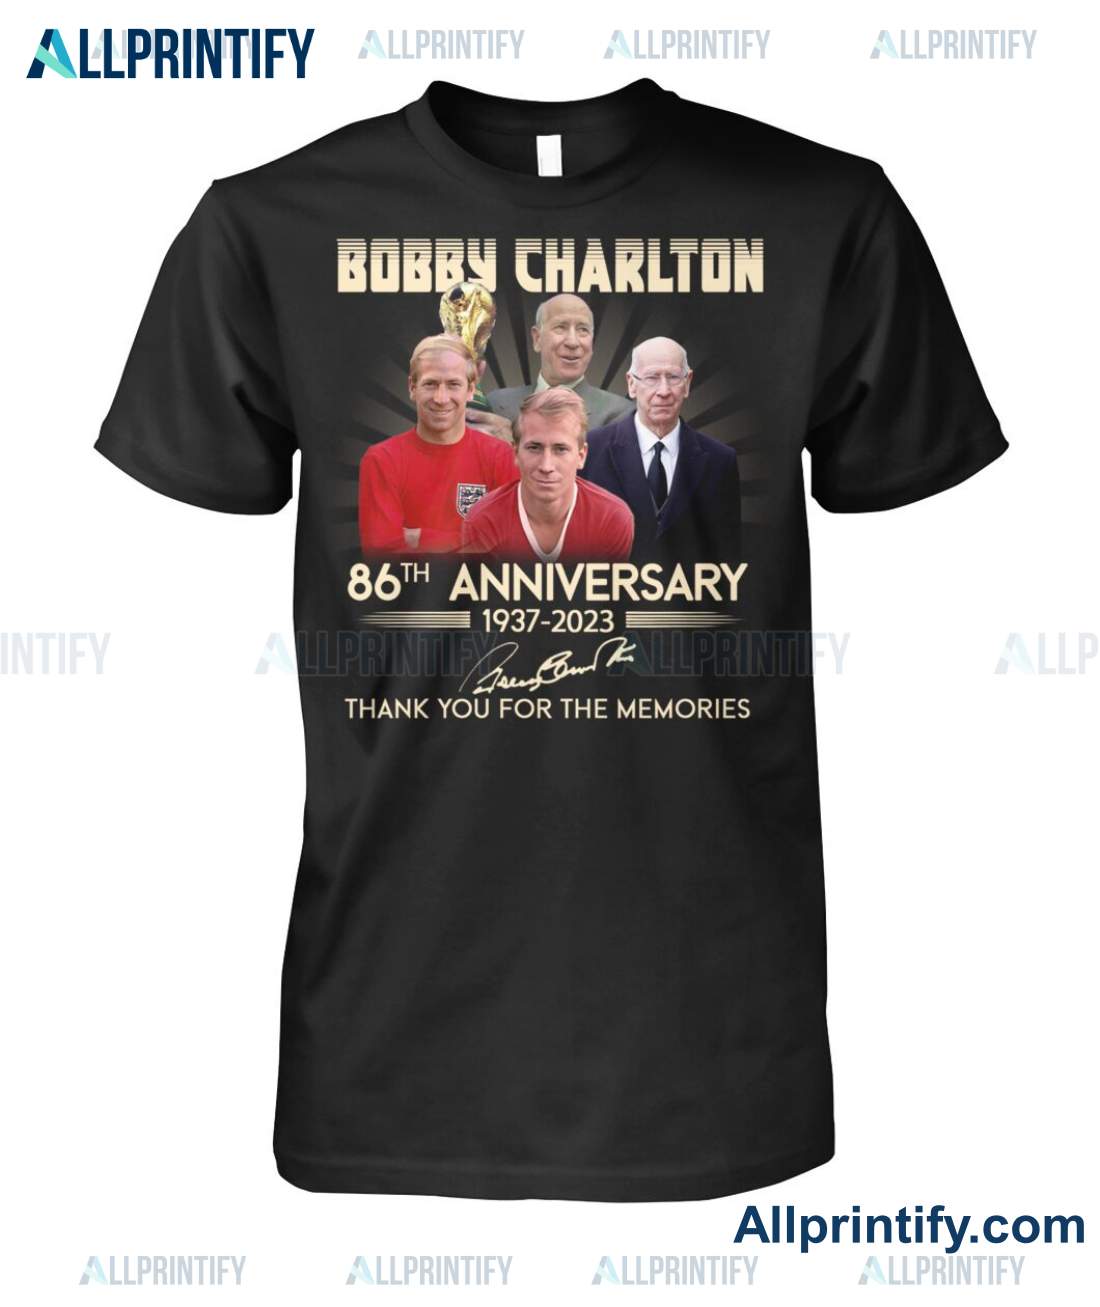 Bobby Charlton 86th Anniversary 1937-2023 Signature Thank You For The Memories Shirt a